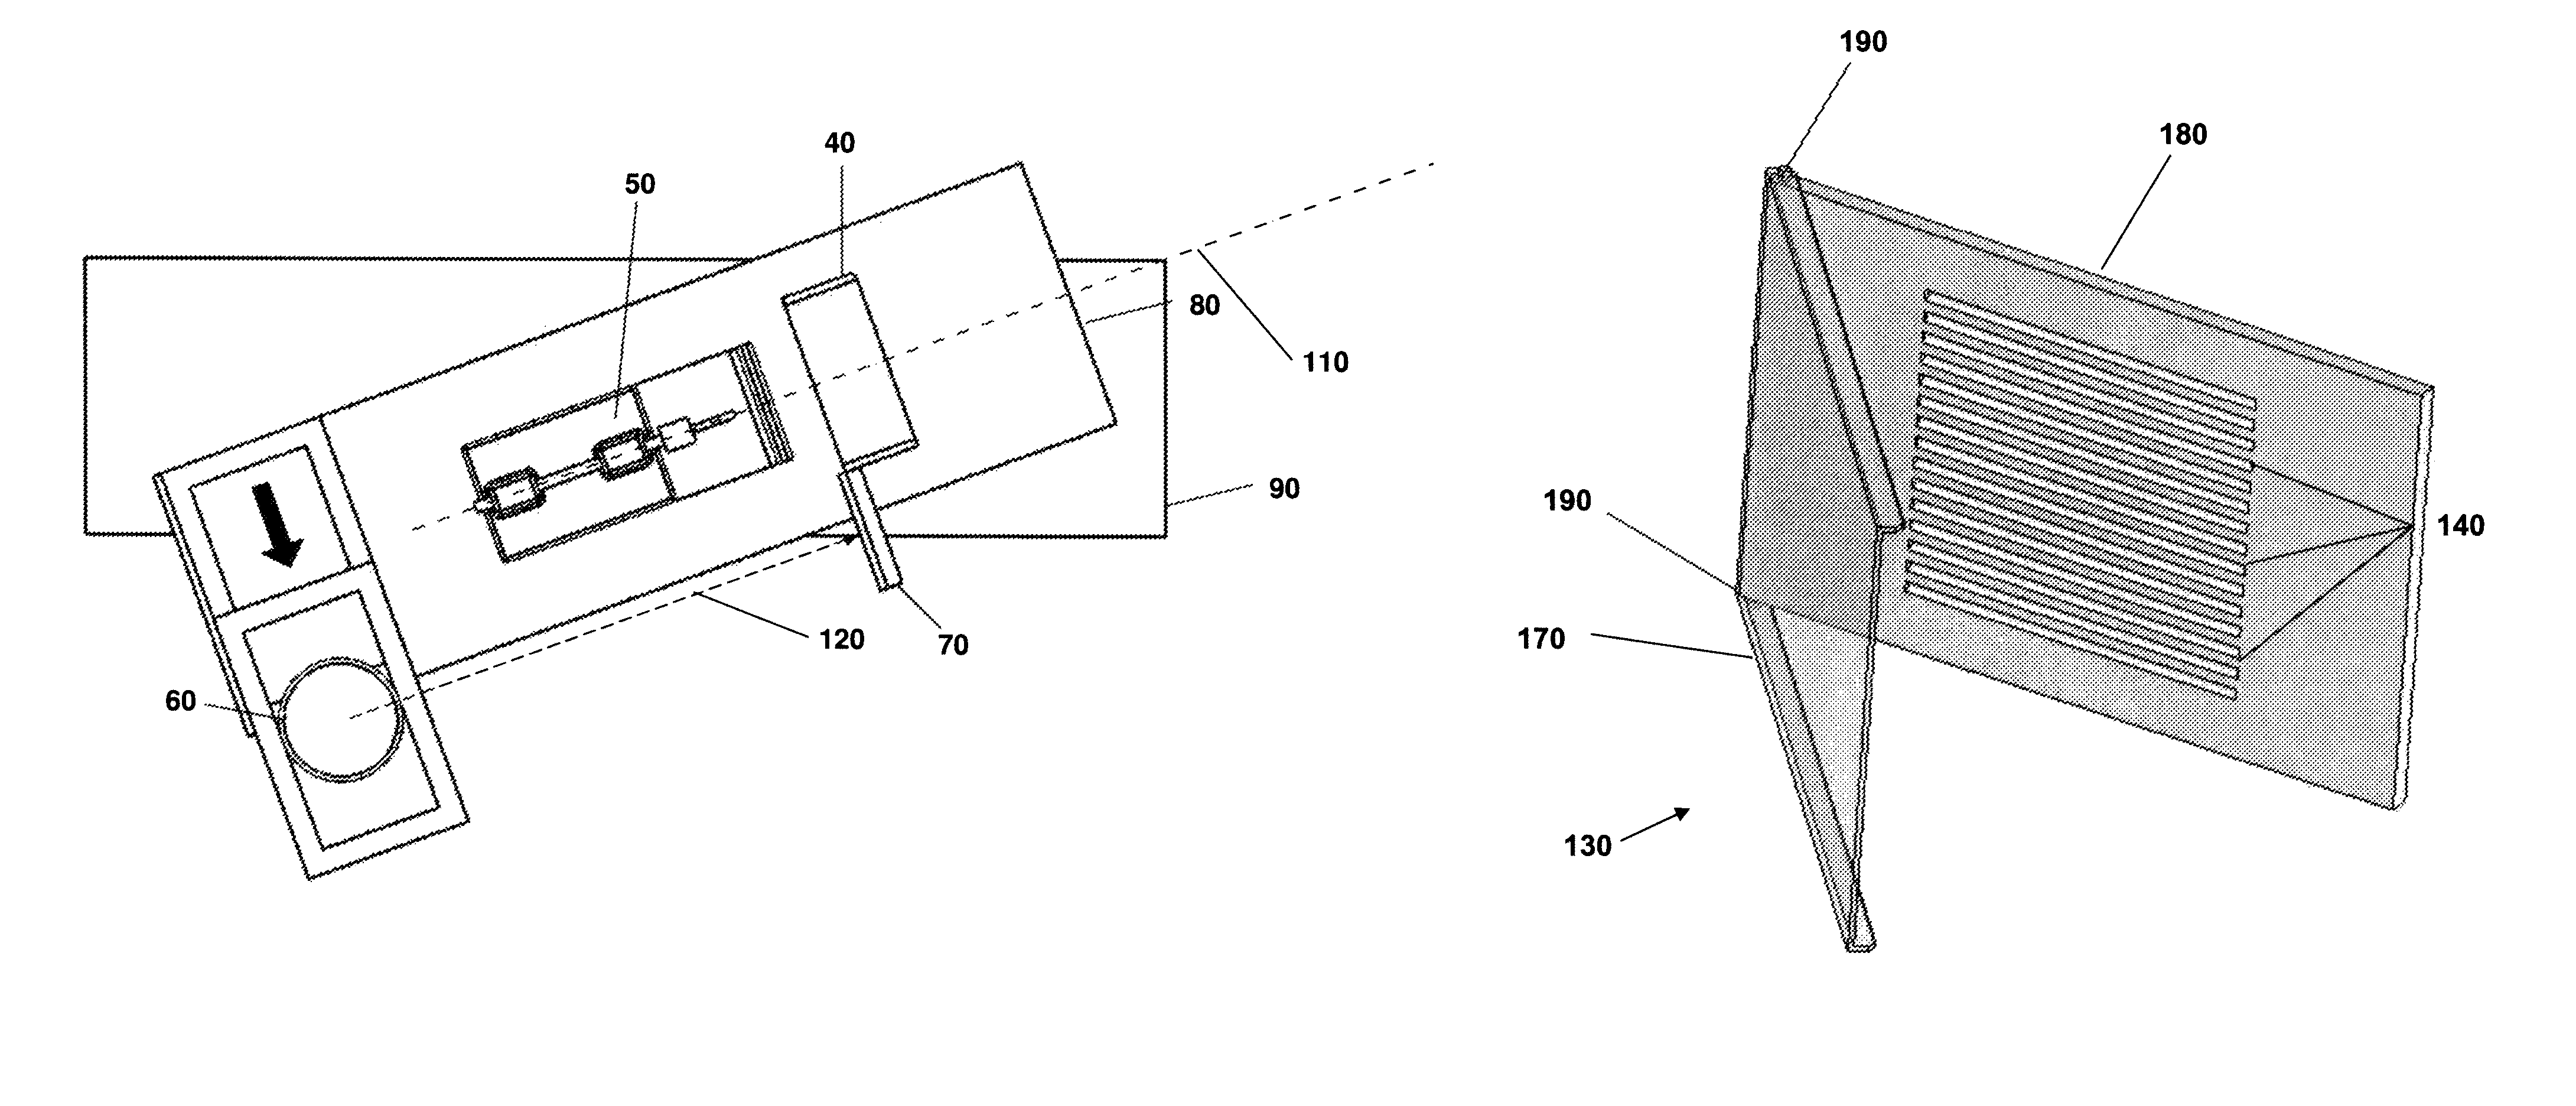 System and apparatus for rapid stereotactic breast biopsy analysis